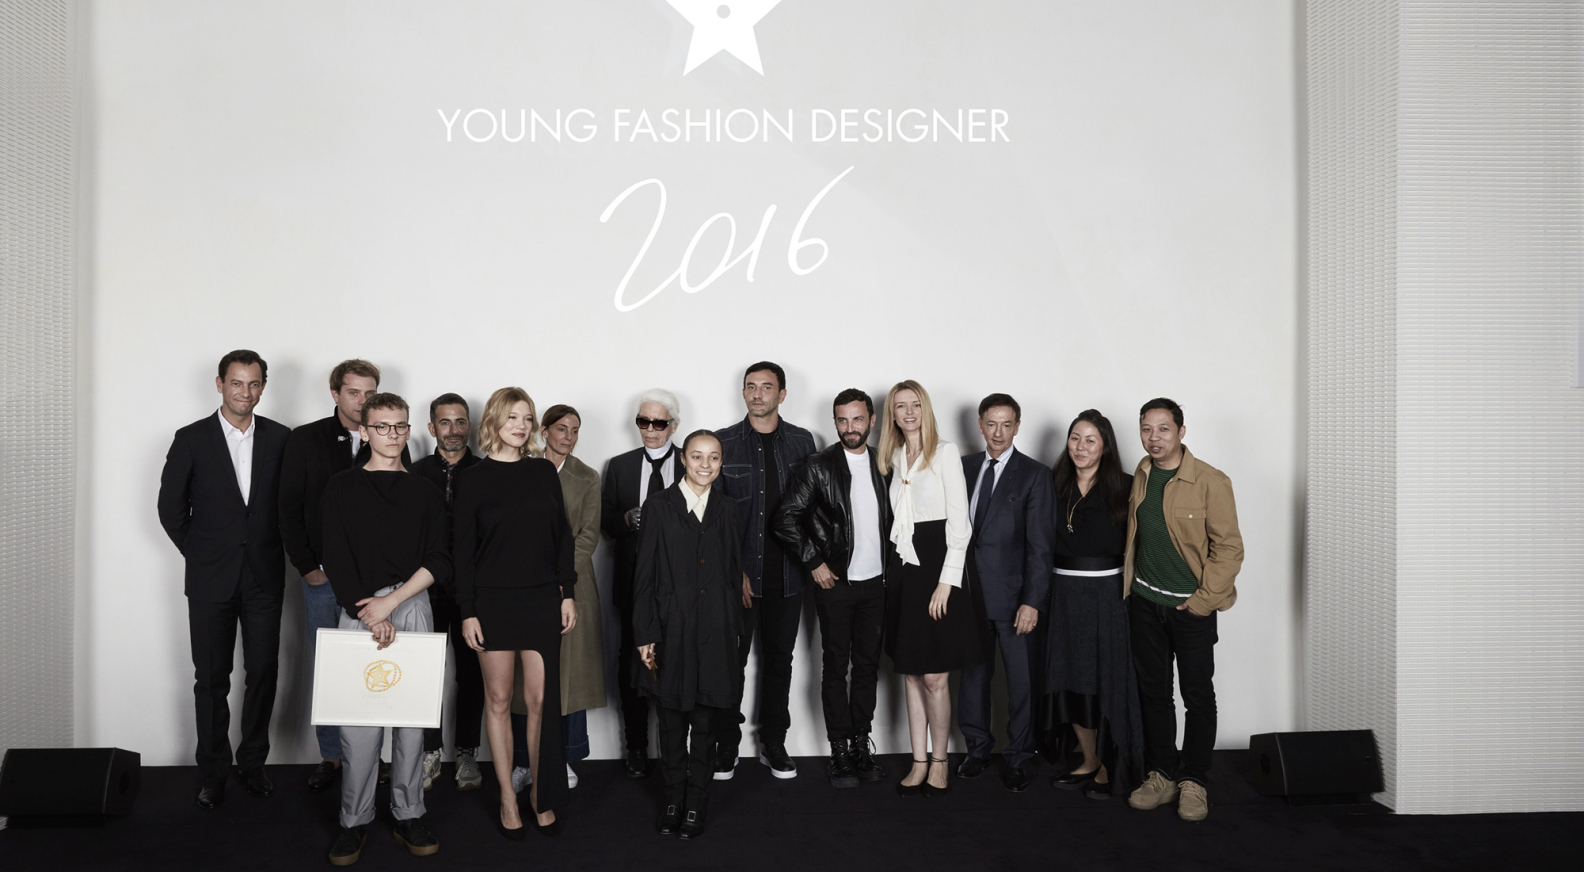 LVMH +16% revenue for 'exceptional 2011